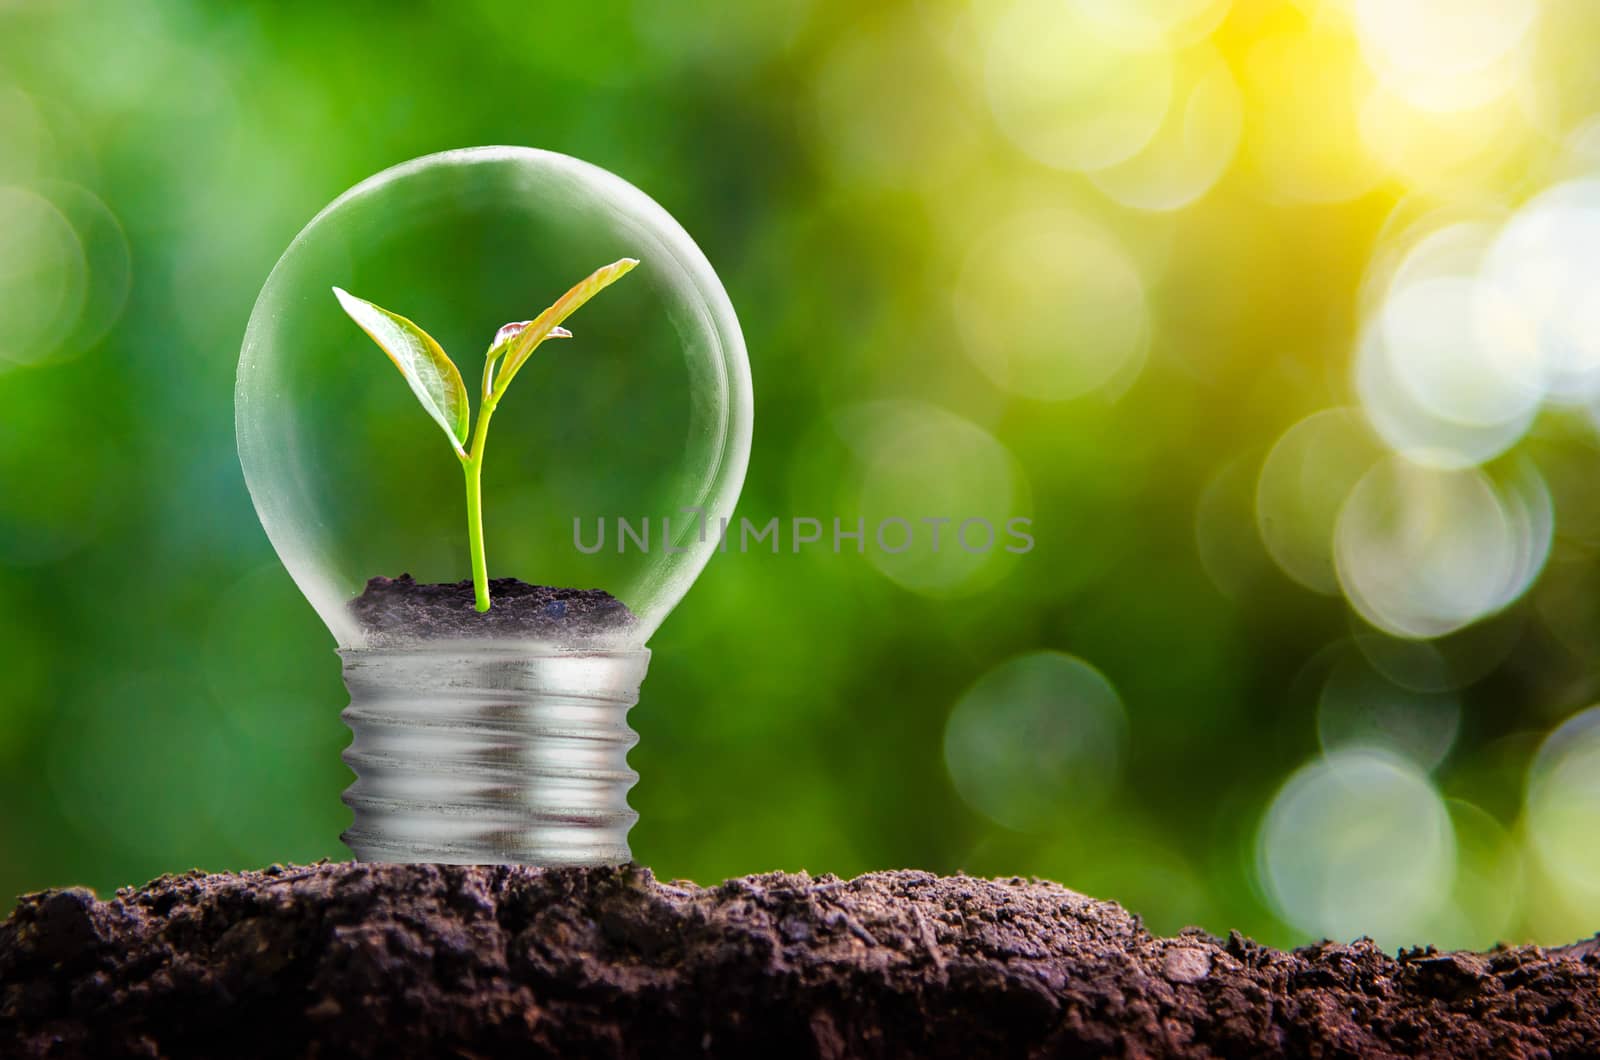 The bulb is located on the inside with leaves forest and the trees are in the light. Concepts of environmental conservation and global warming plant growing inside lamp bulb over dry by sarayut_thaneerat